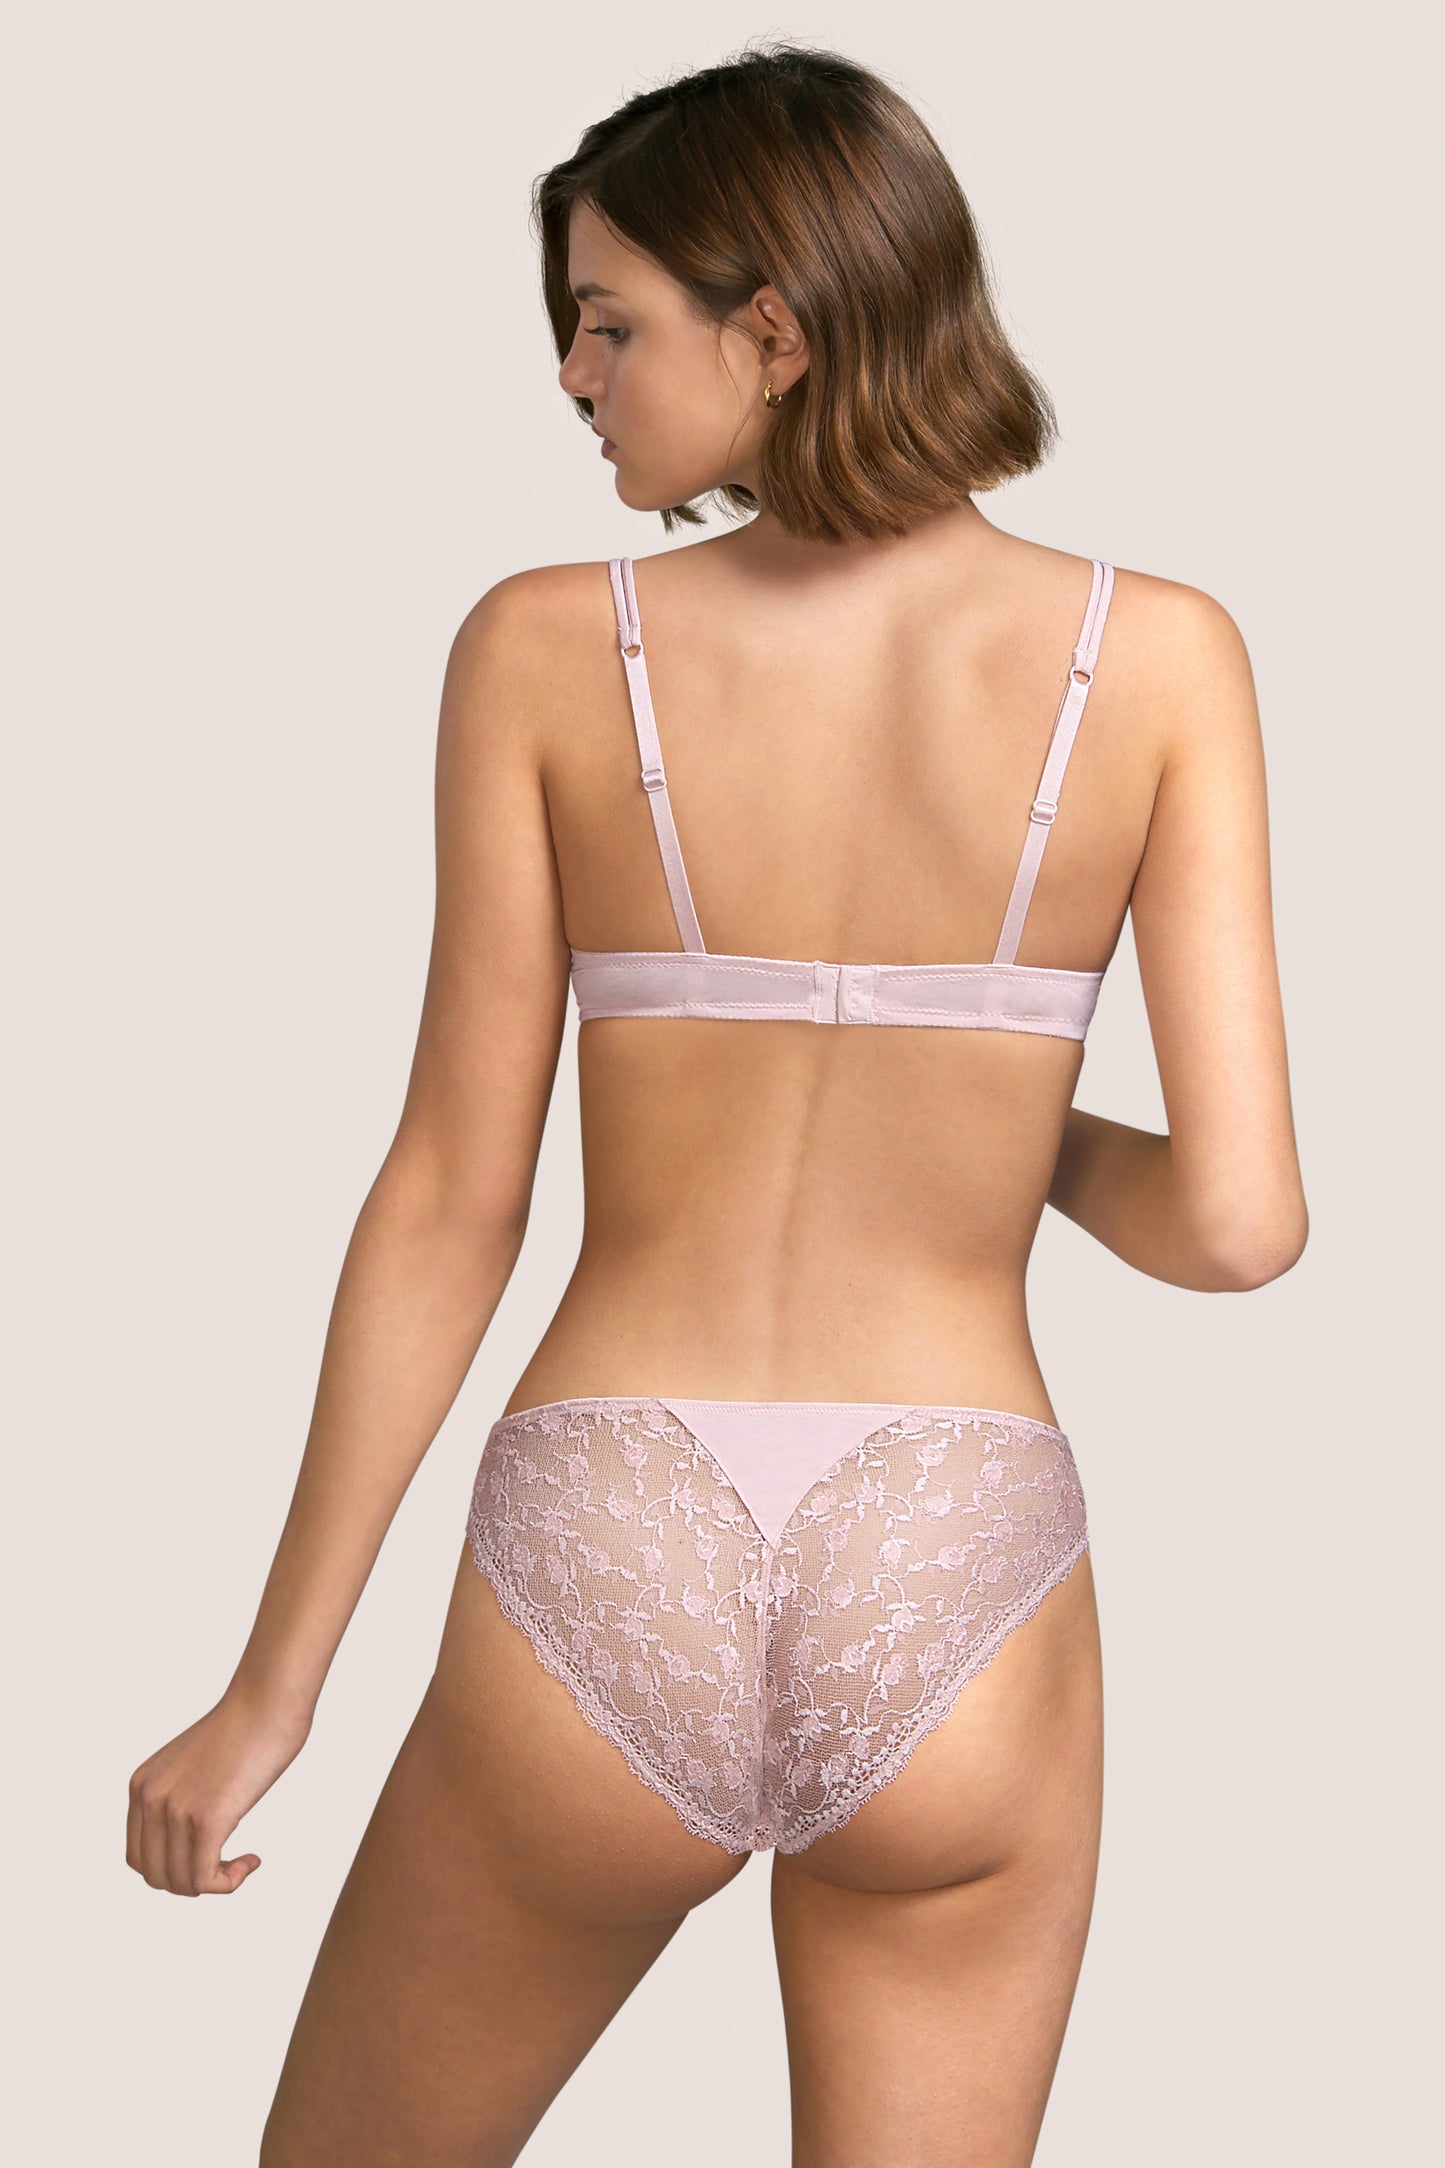 Andres Sarda Raven volle cup bh Rose Mist